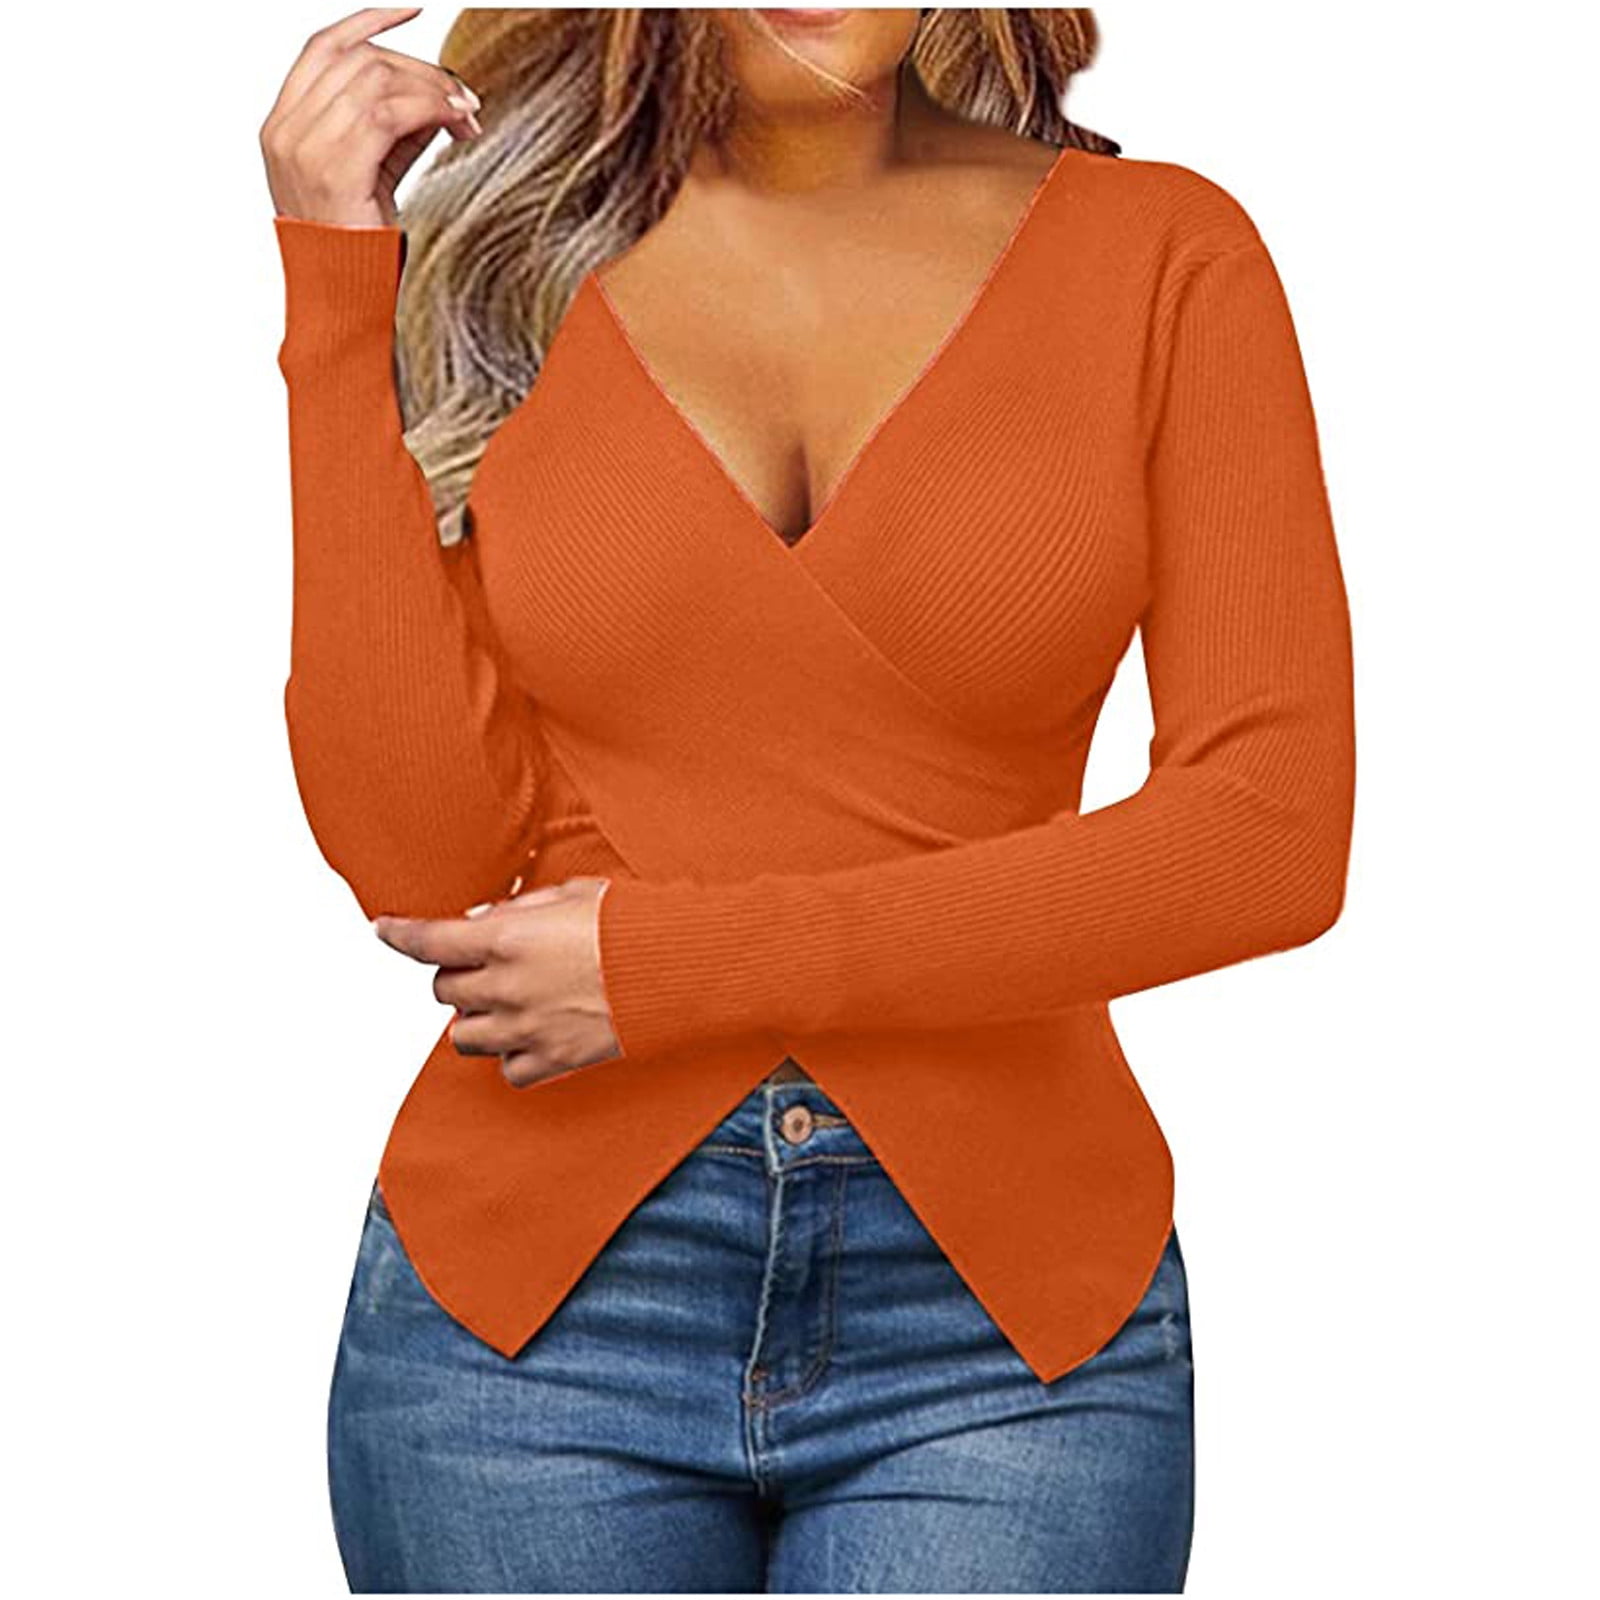 Long Sleeve T Shirts Loose Tunic Western Tops for Ladies